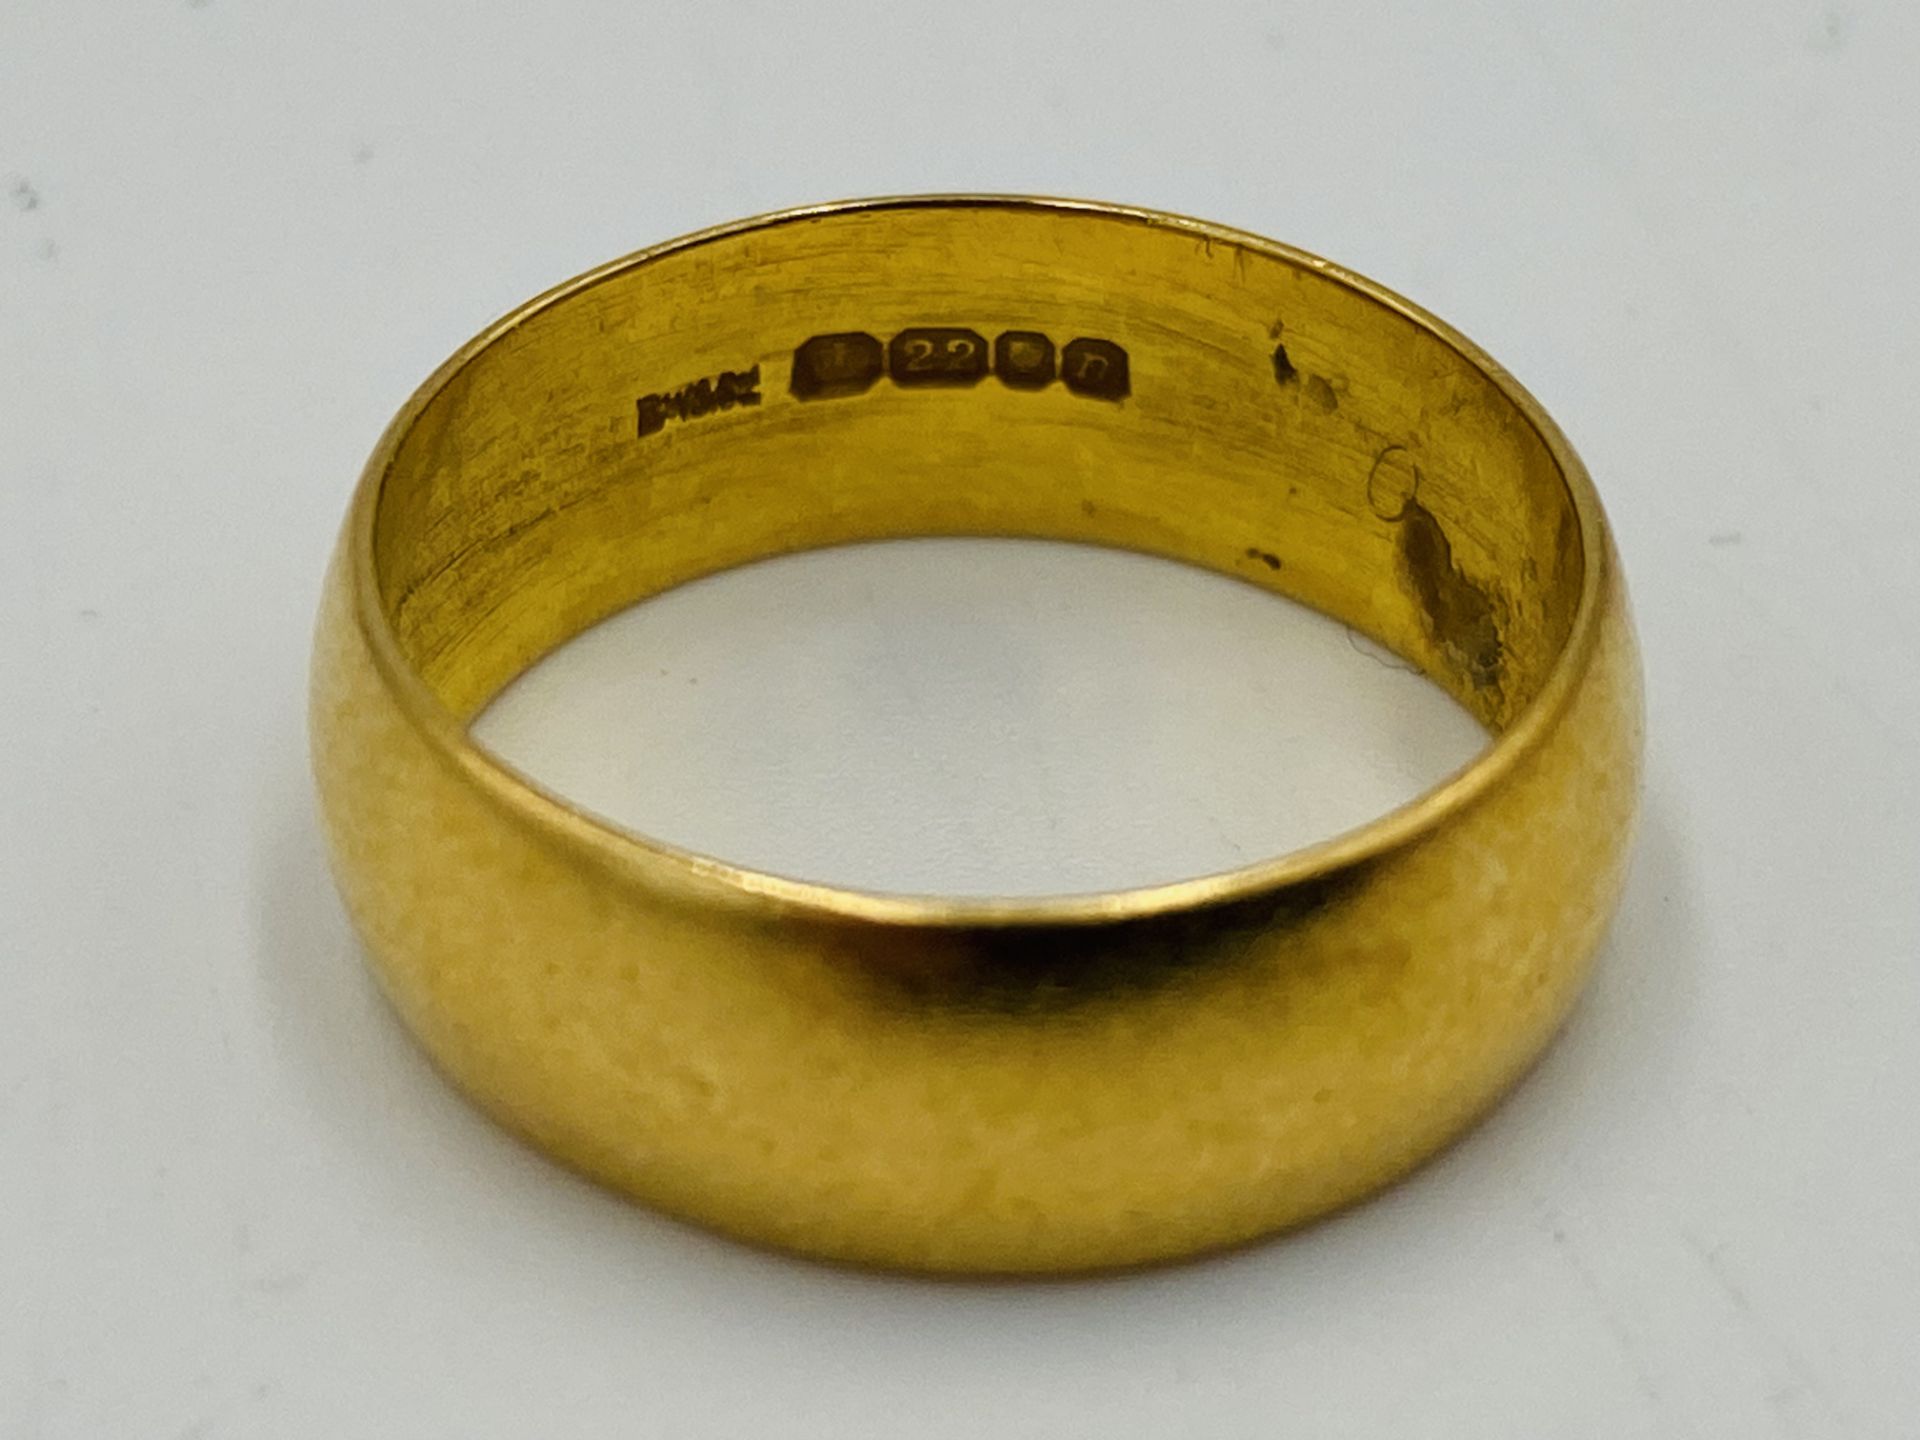 22ct gold band - Image 2 of 3